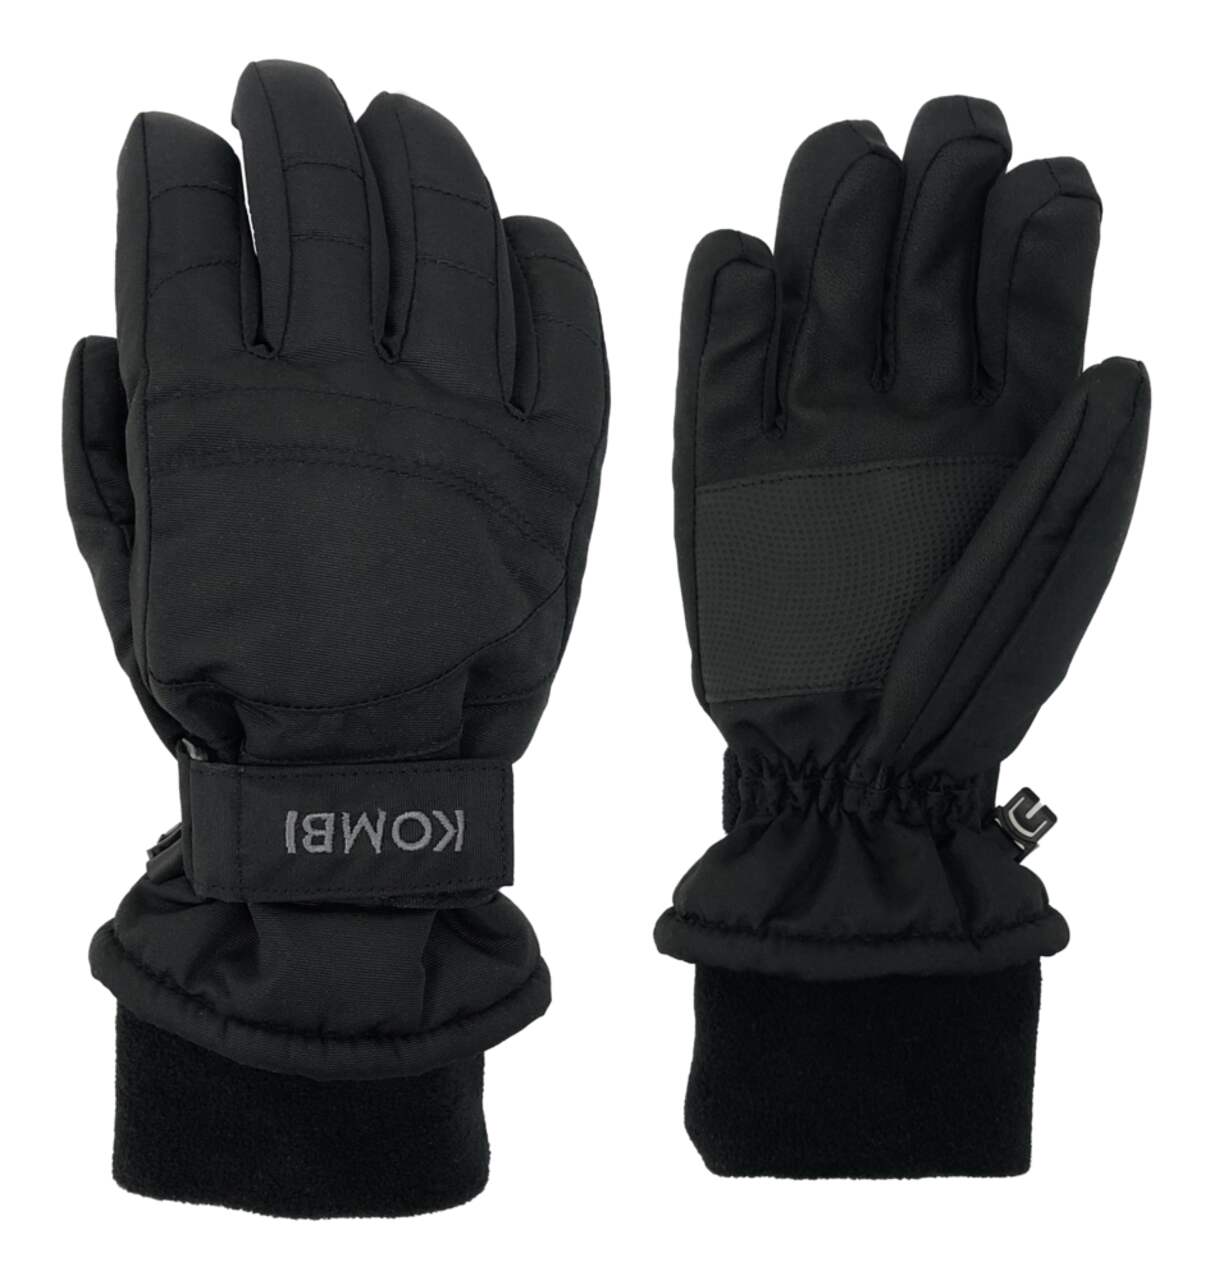 Kombi Youth Thermal Insulated Winter Ski Snowboard Gloves